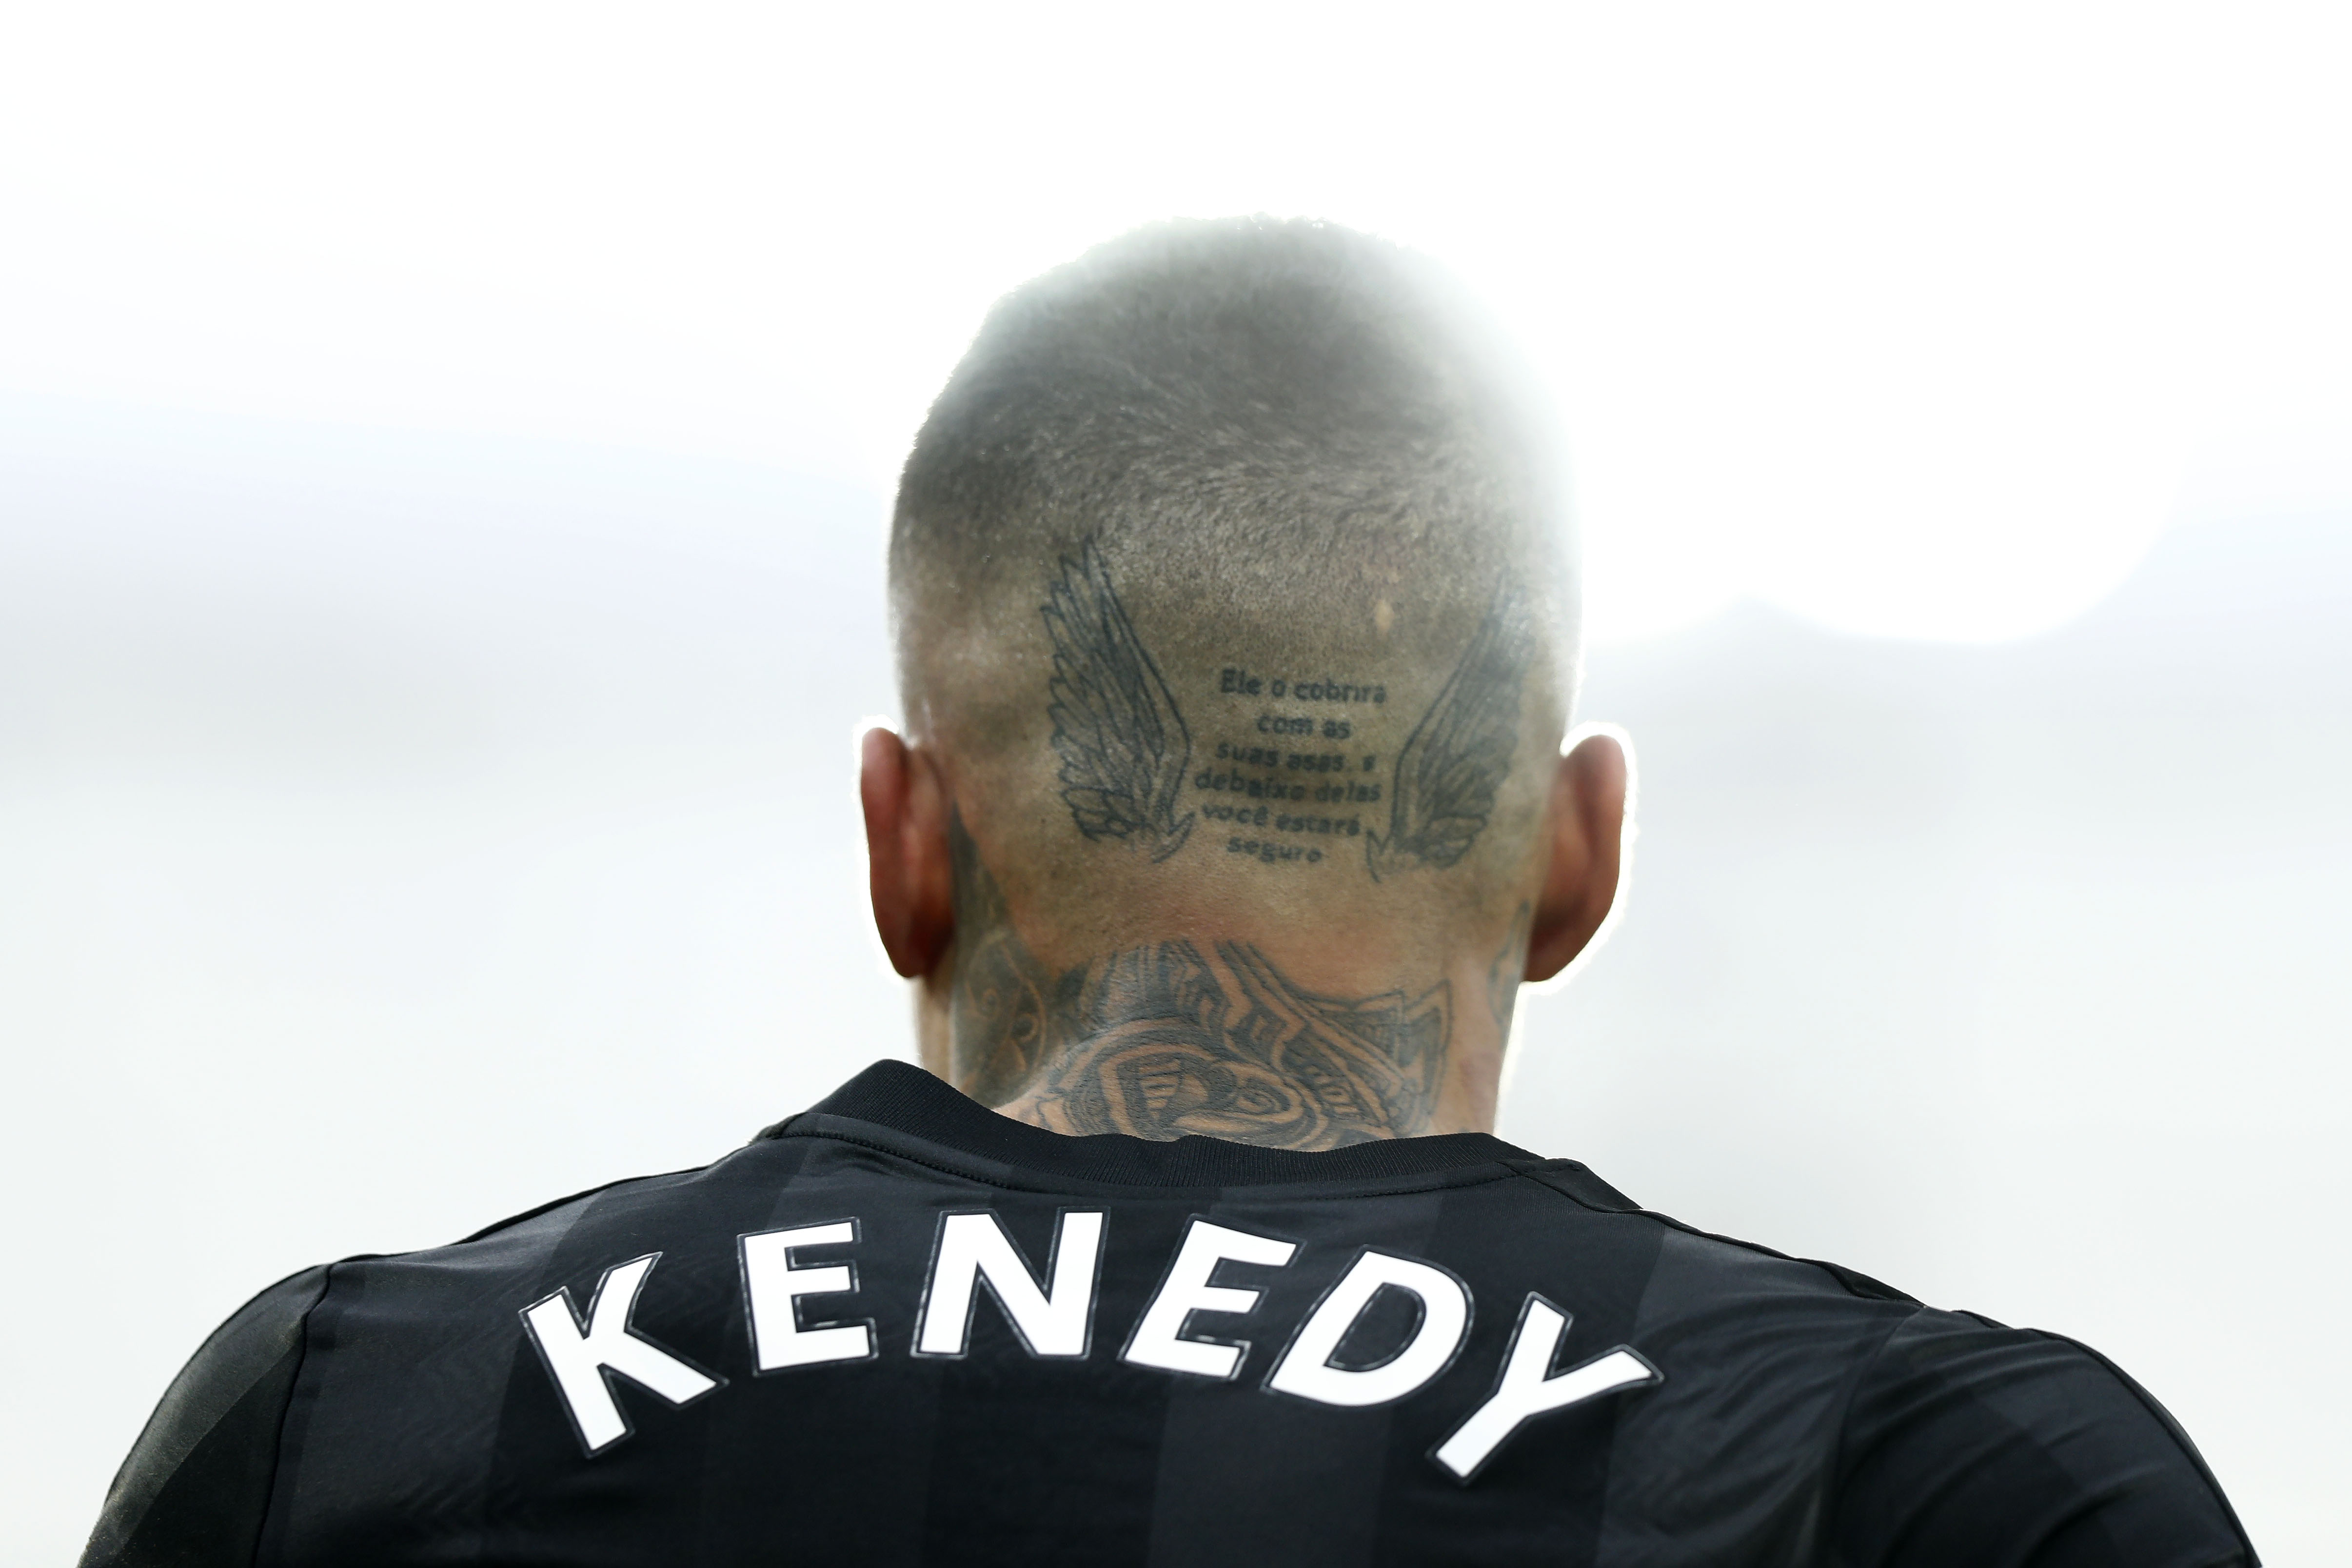 Newcastle United's Brazilian midfielder Kenedy is pictured on the field during the English Premier League football match between Crystal Palace and Newcastle United at Selhurst Park in south London on February 4, 2018. / AFP PHOTO / Adrian DENNIS / RESTRICTED TO EDITORIAL USE. No use with unauthorized audio, video, data, fixture lists, club/league logos or 'live' services. Online in-match use limited to 75 images, no video emulation. No use in betting, games or single club/league/player publications.  /         (Photo credit should read ADRIAN DENNIS/AFP/Getty Images)